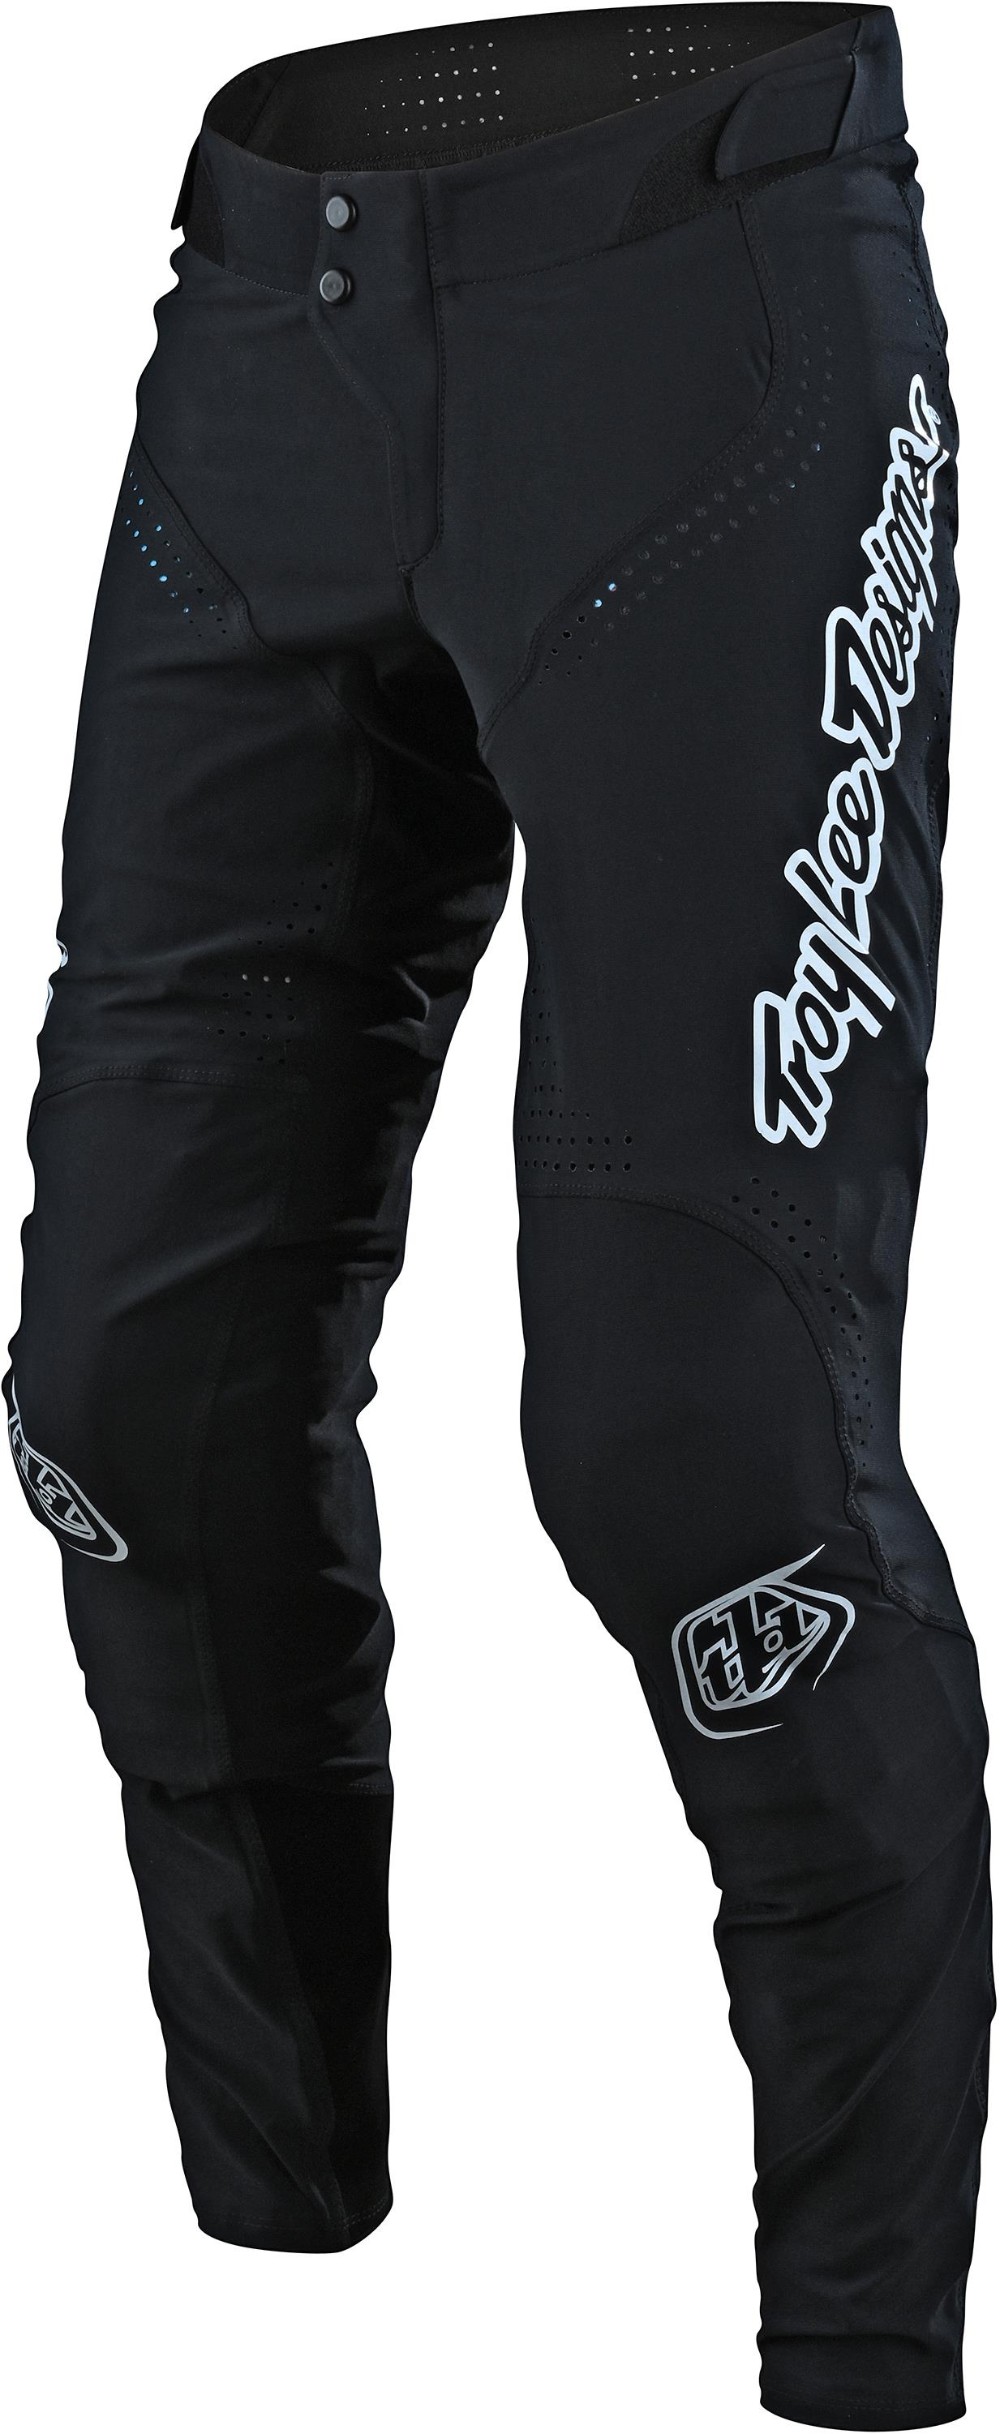 Sprint Ultra MTB Cycling Trousers image 0